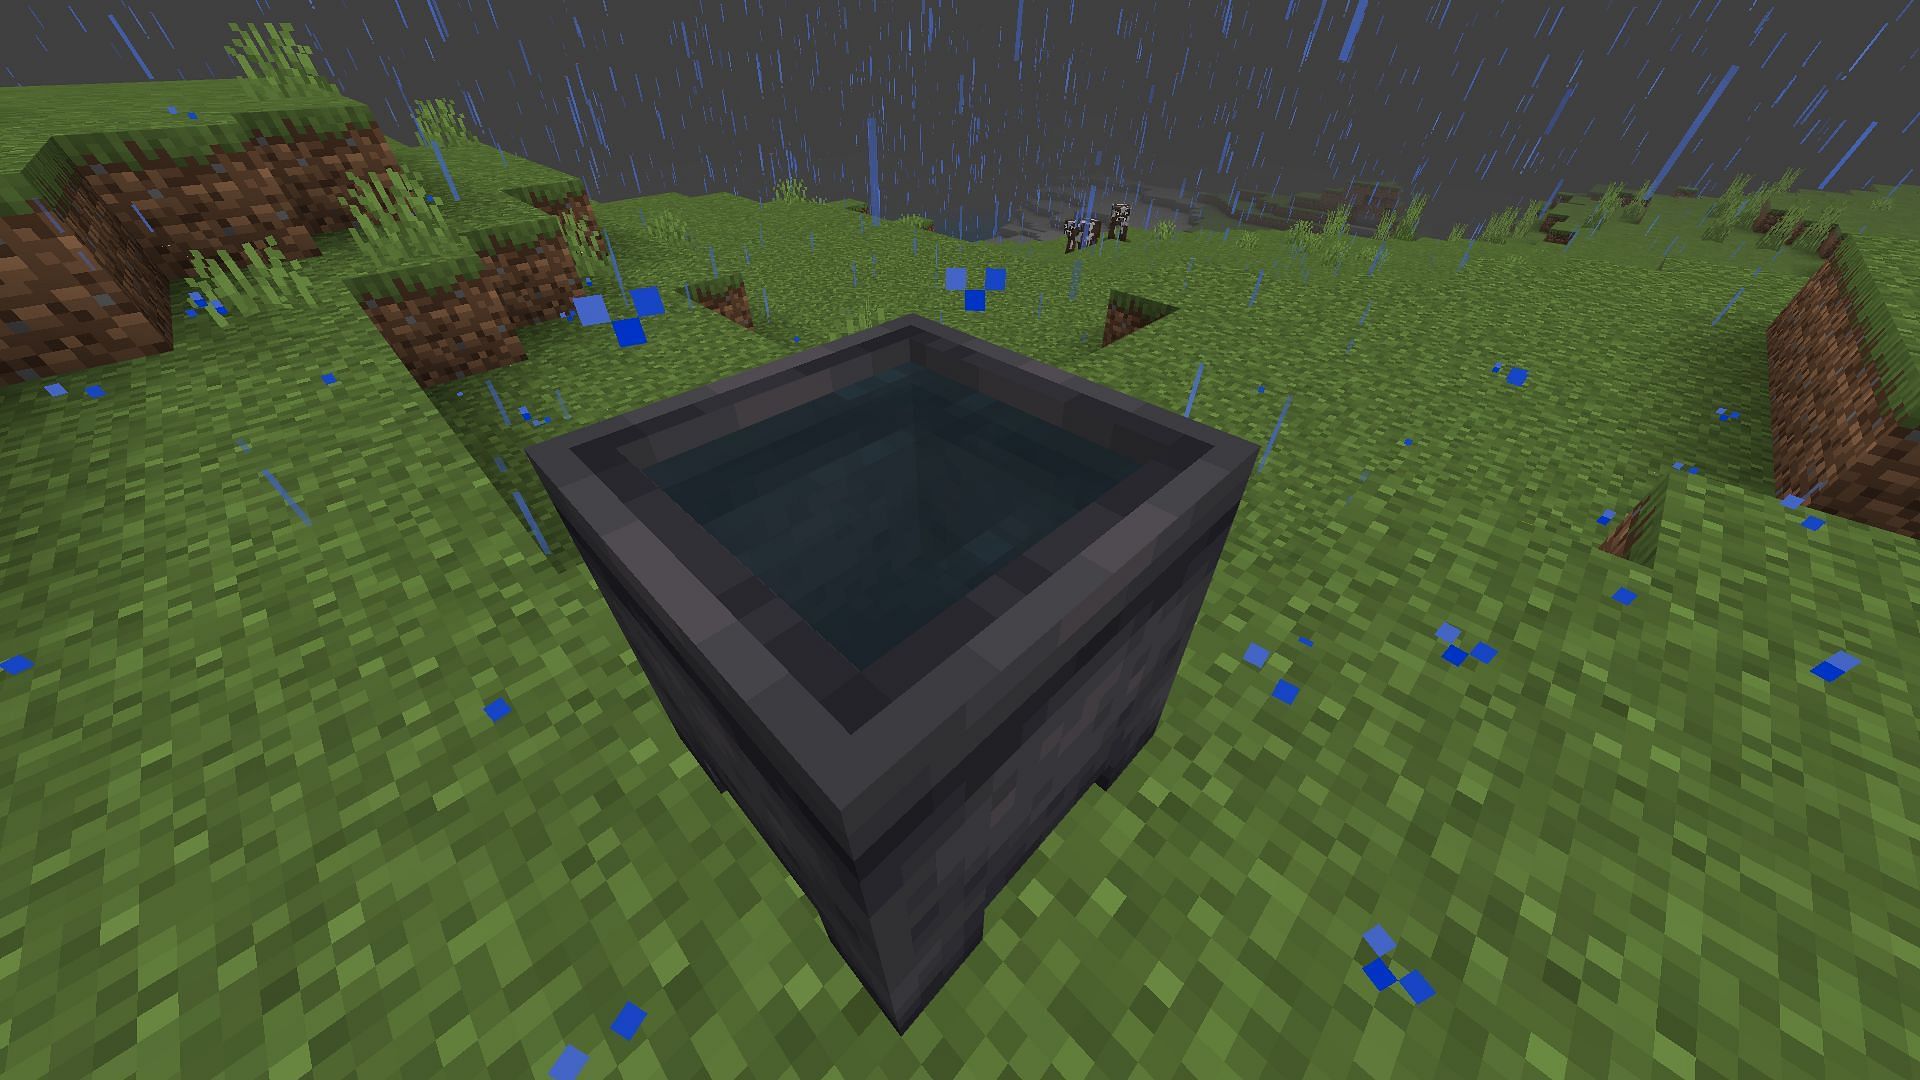 Water can be filled into a cauldron through rain and other natural means in Minecraft (Image via Mojang)